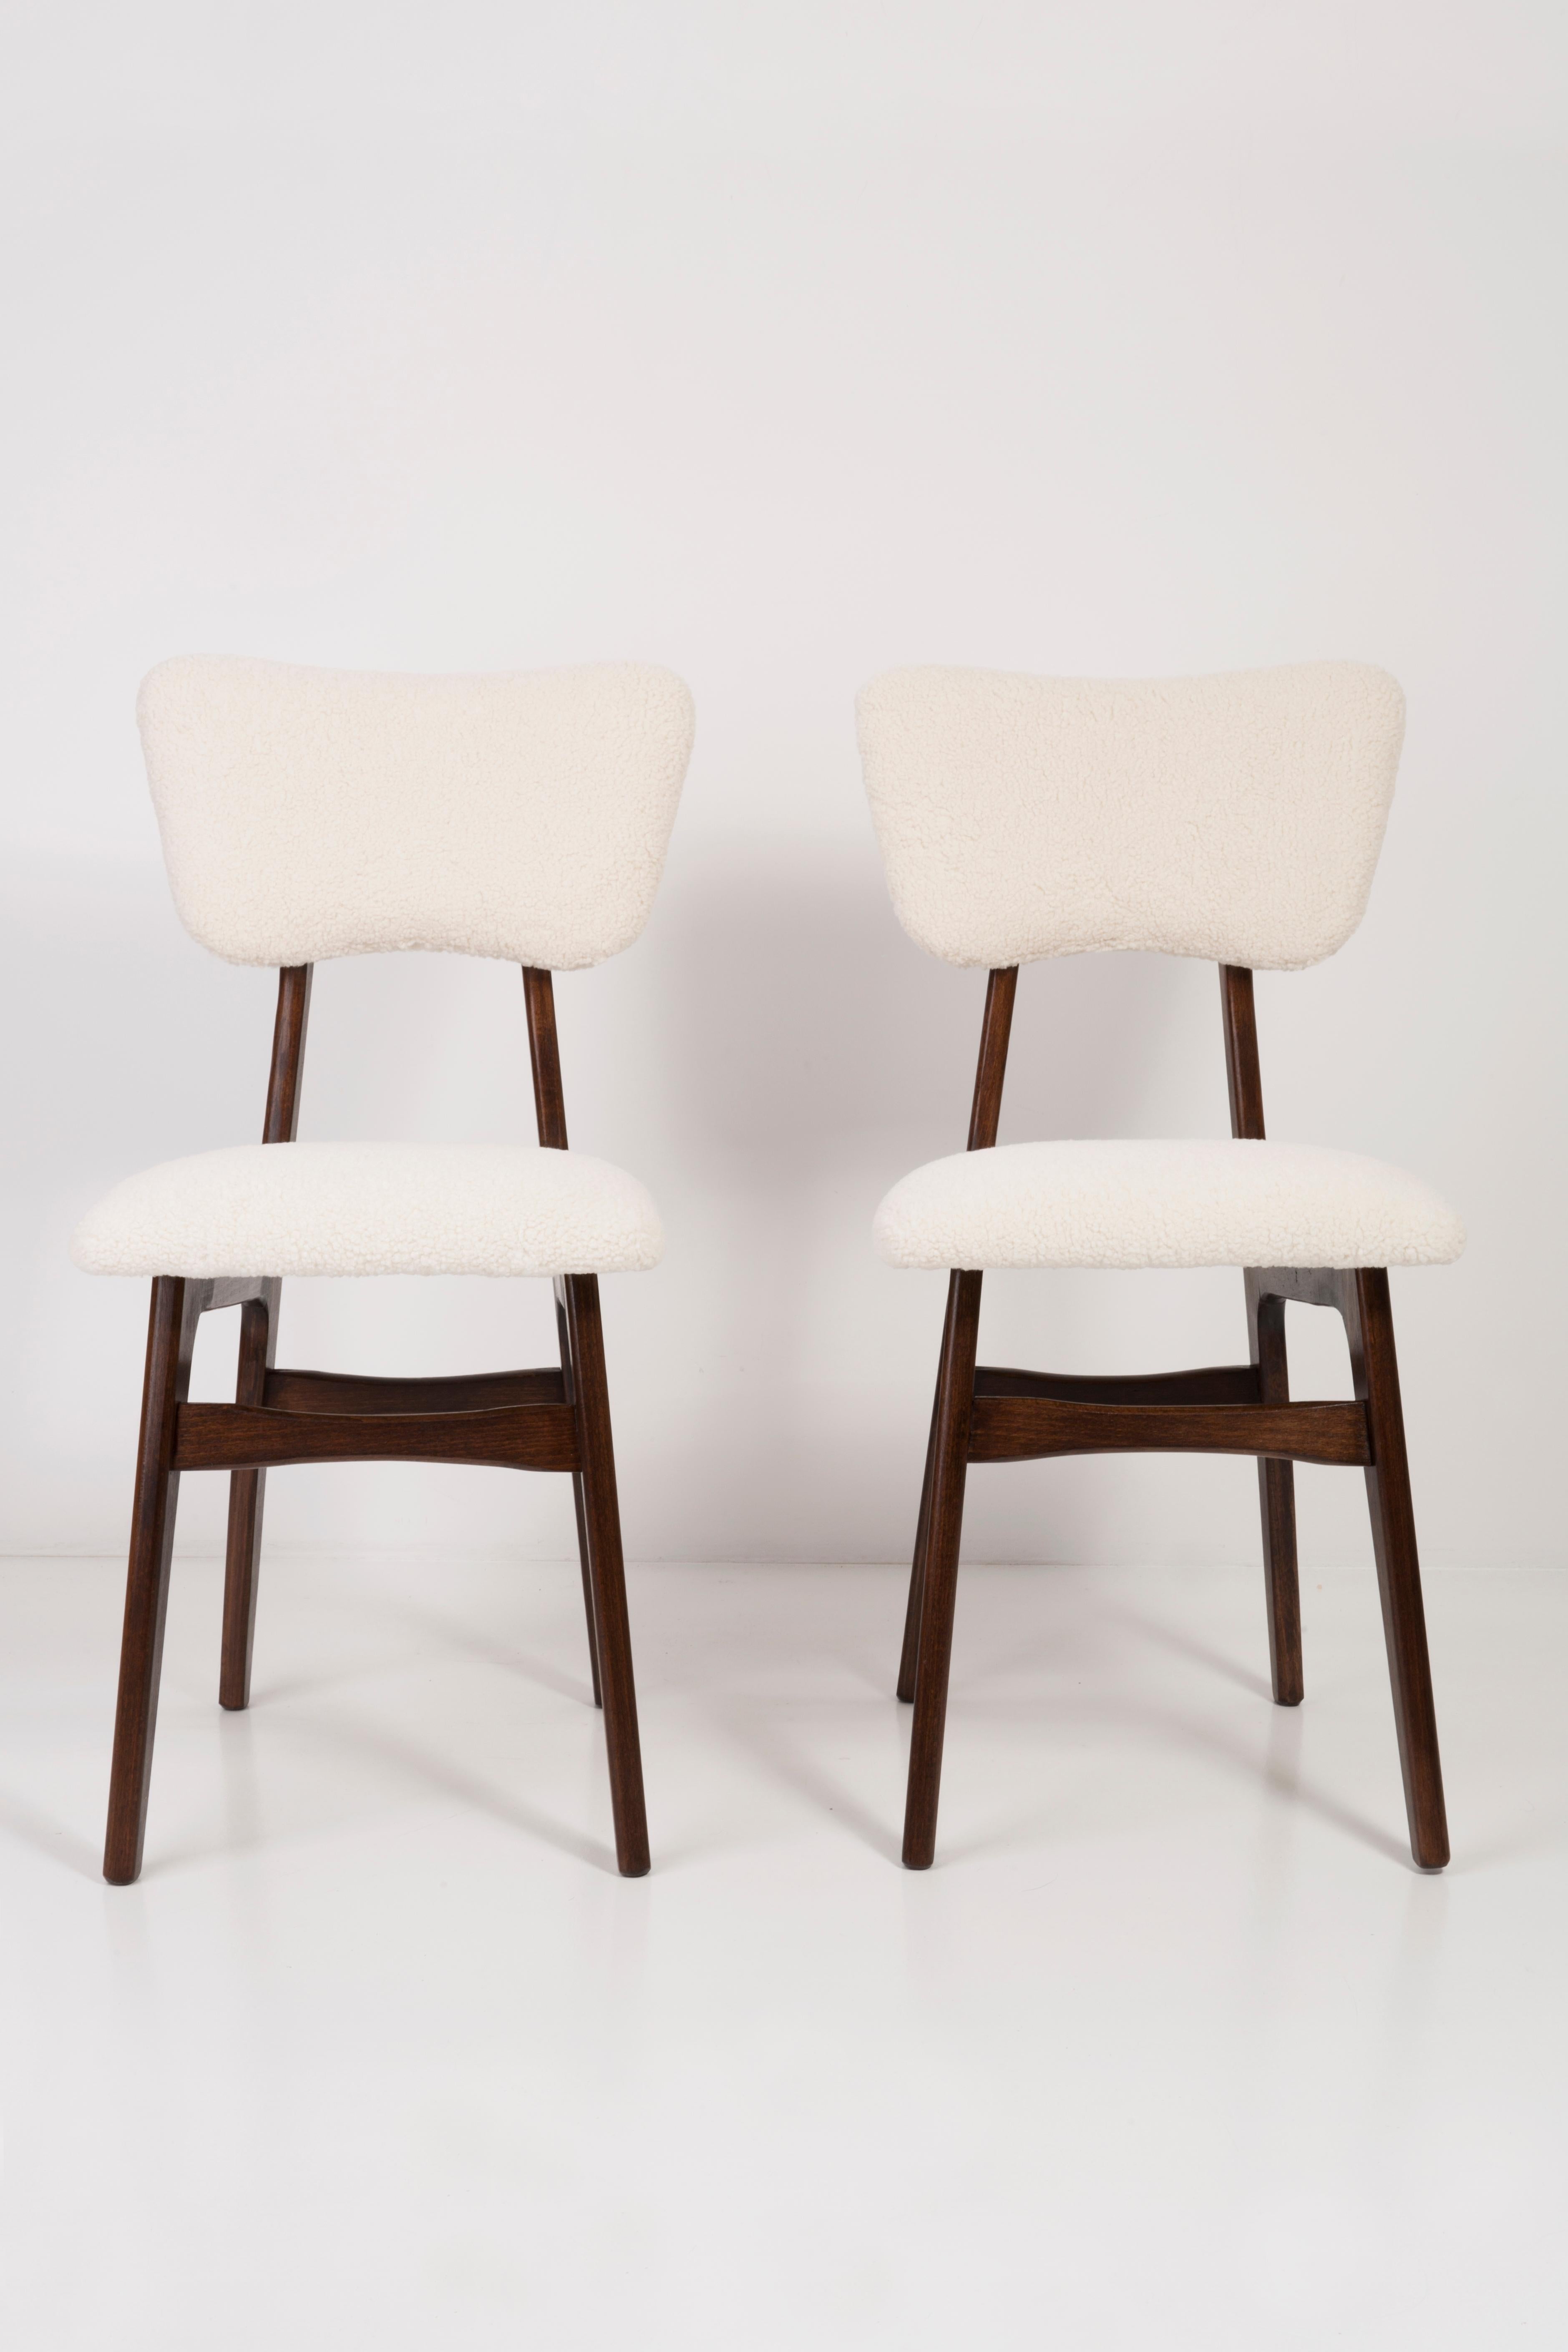 Set of Four 20th Century Light Crème Boucle Chairs, 1960s For Sale 3